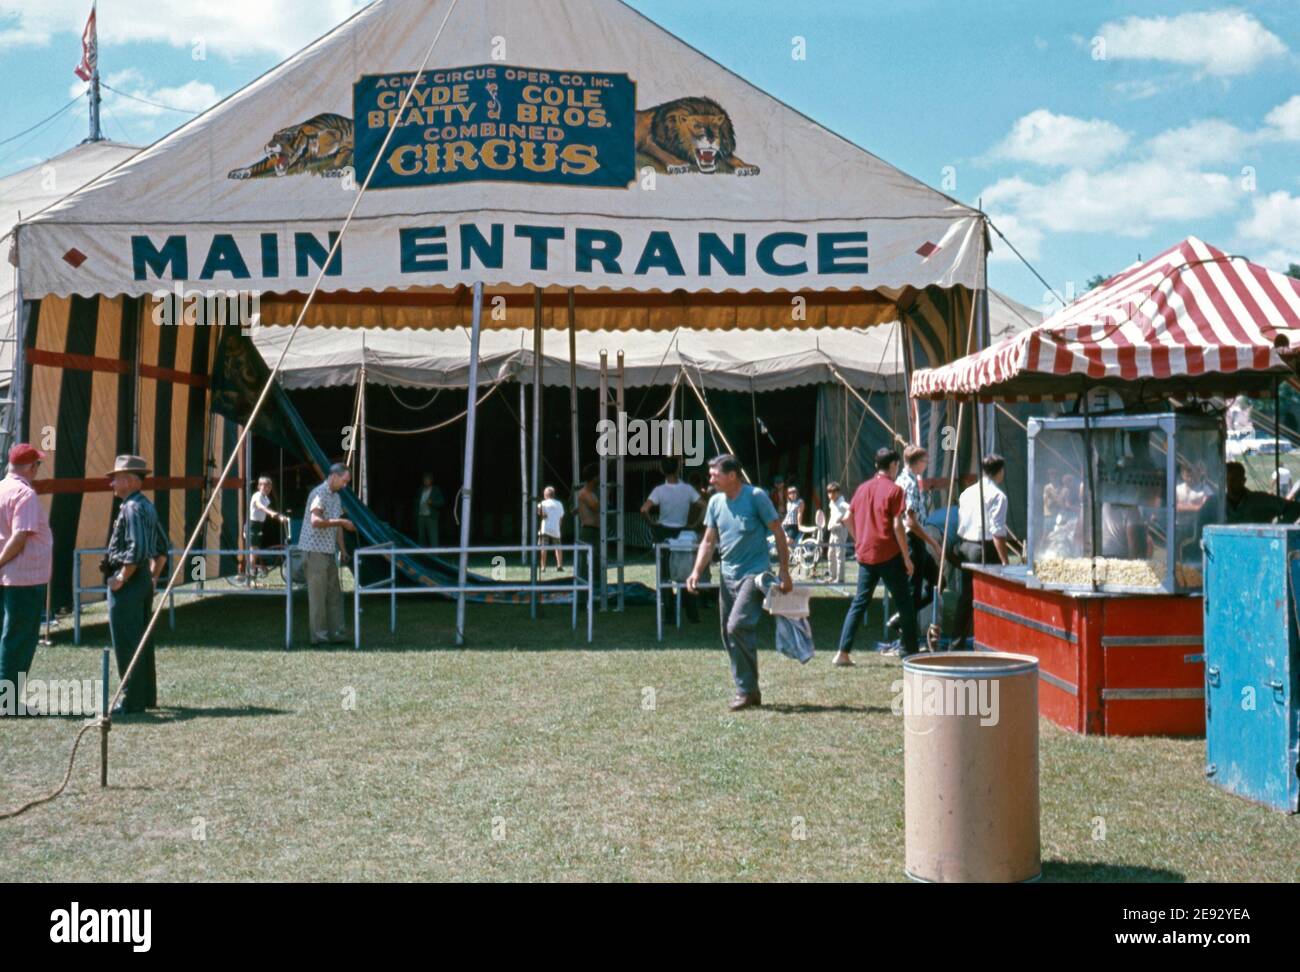 Workers make ready the main entrance to the big top at the Clyde Beatty and Cole Bros Brothers Combined Circus, USA c.1960. The painted banner displayed has a lion and tiger on it. This image is from an old American amateur Kodak colour transparency. Stock Photo